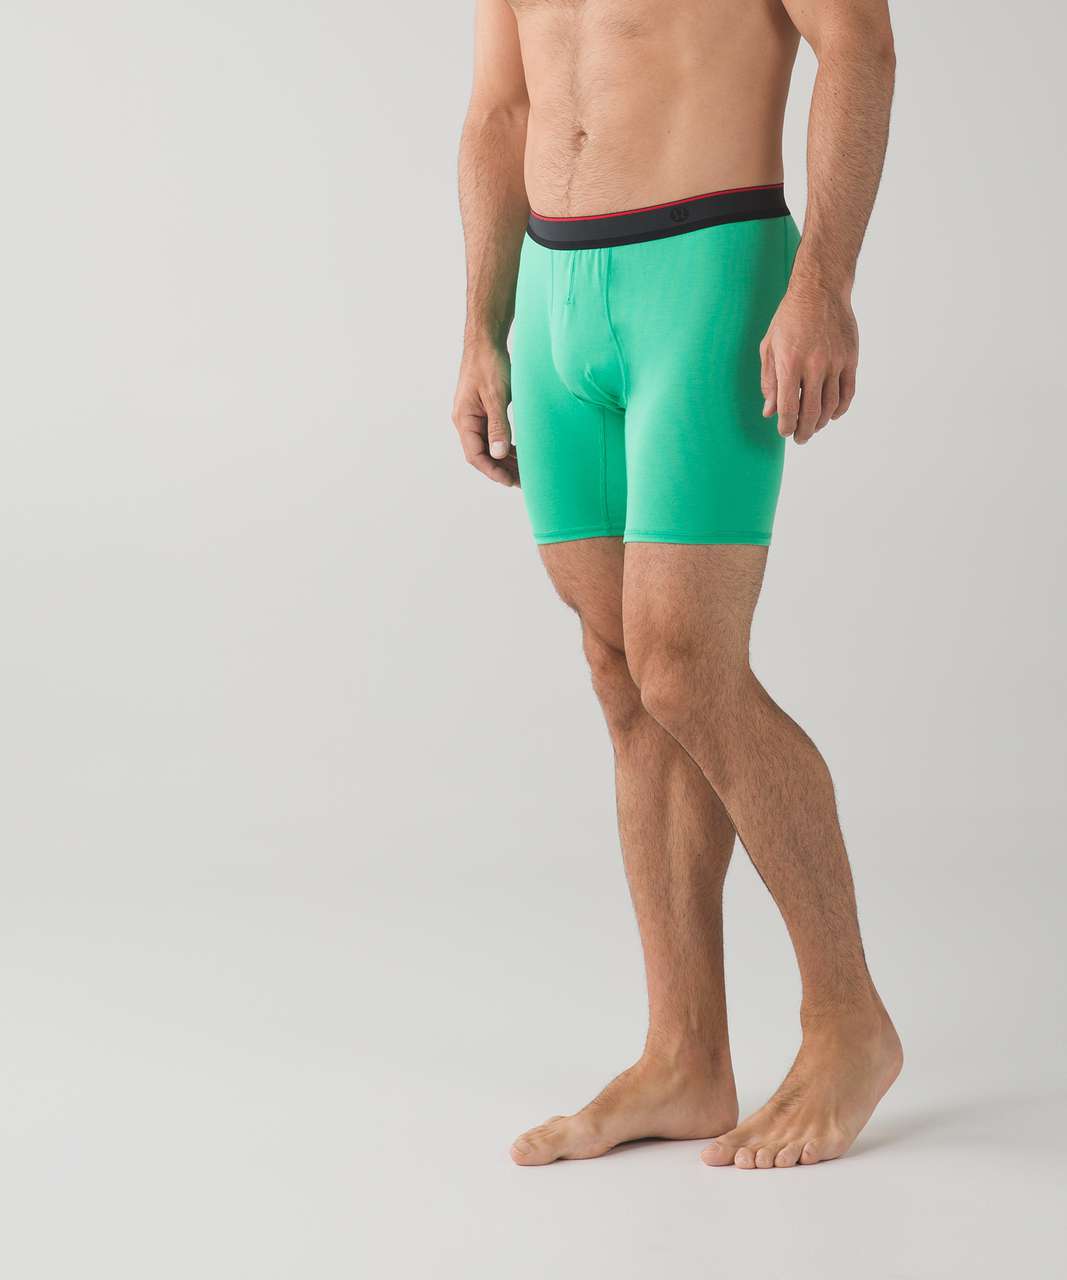 Lululemon No Boxer Boxer (The Long One) - Very Green